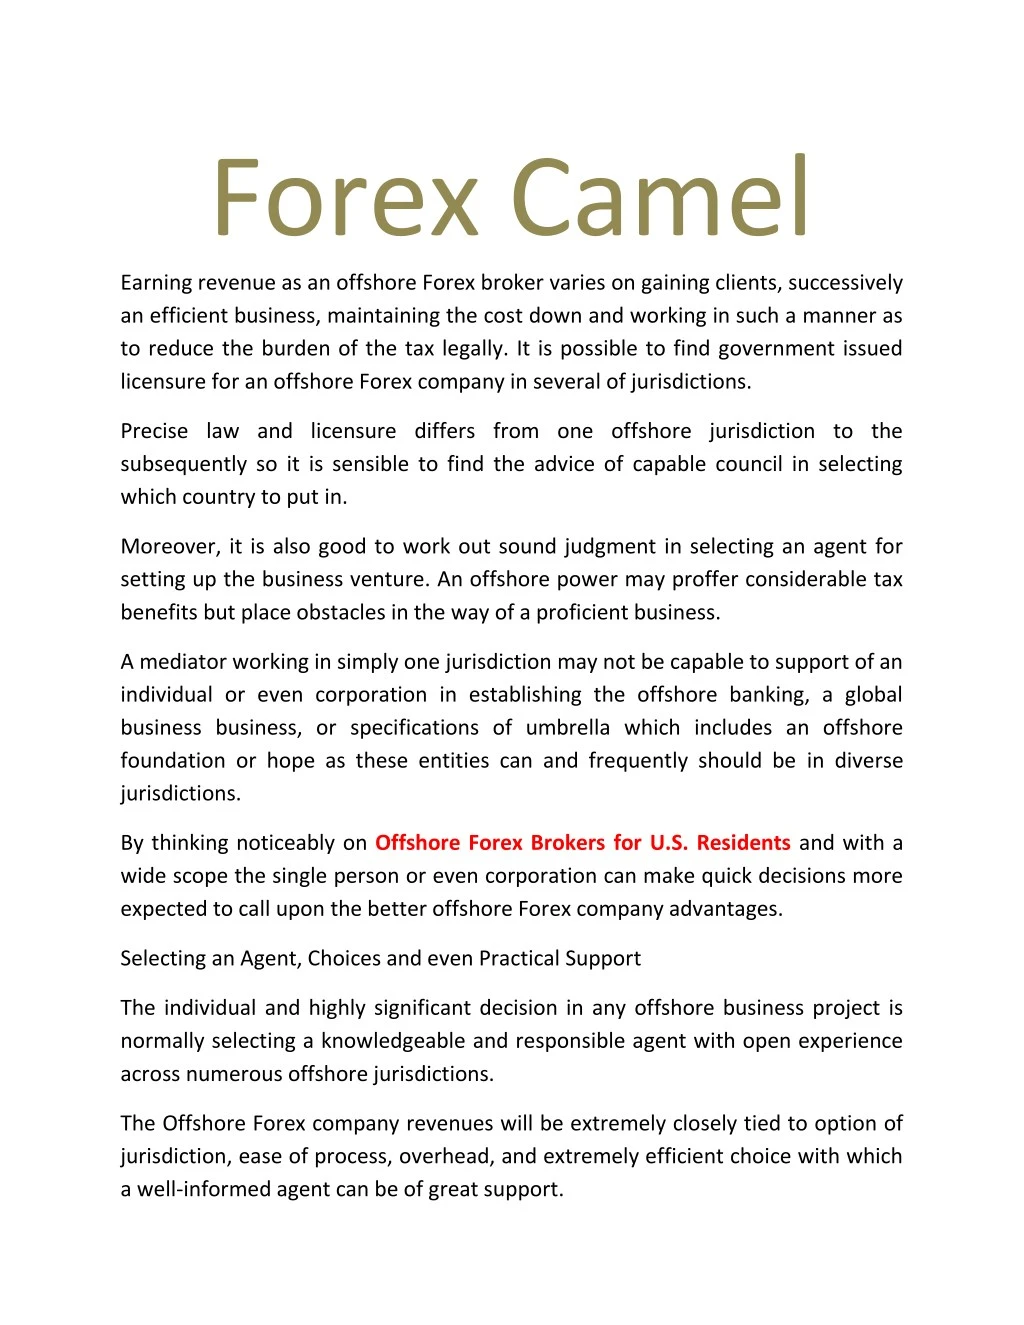 forex camel earning revenue as an offshore forex